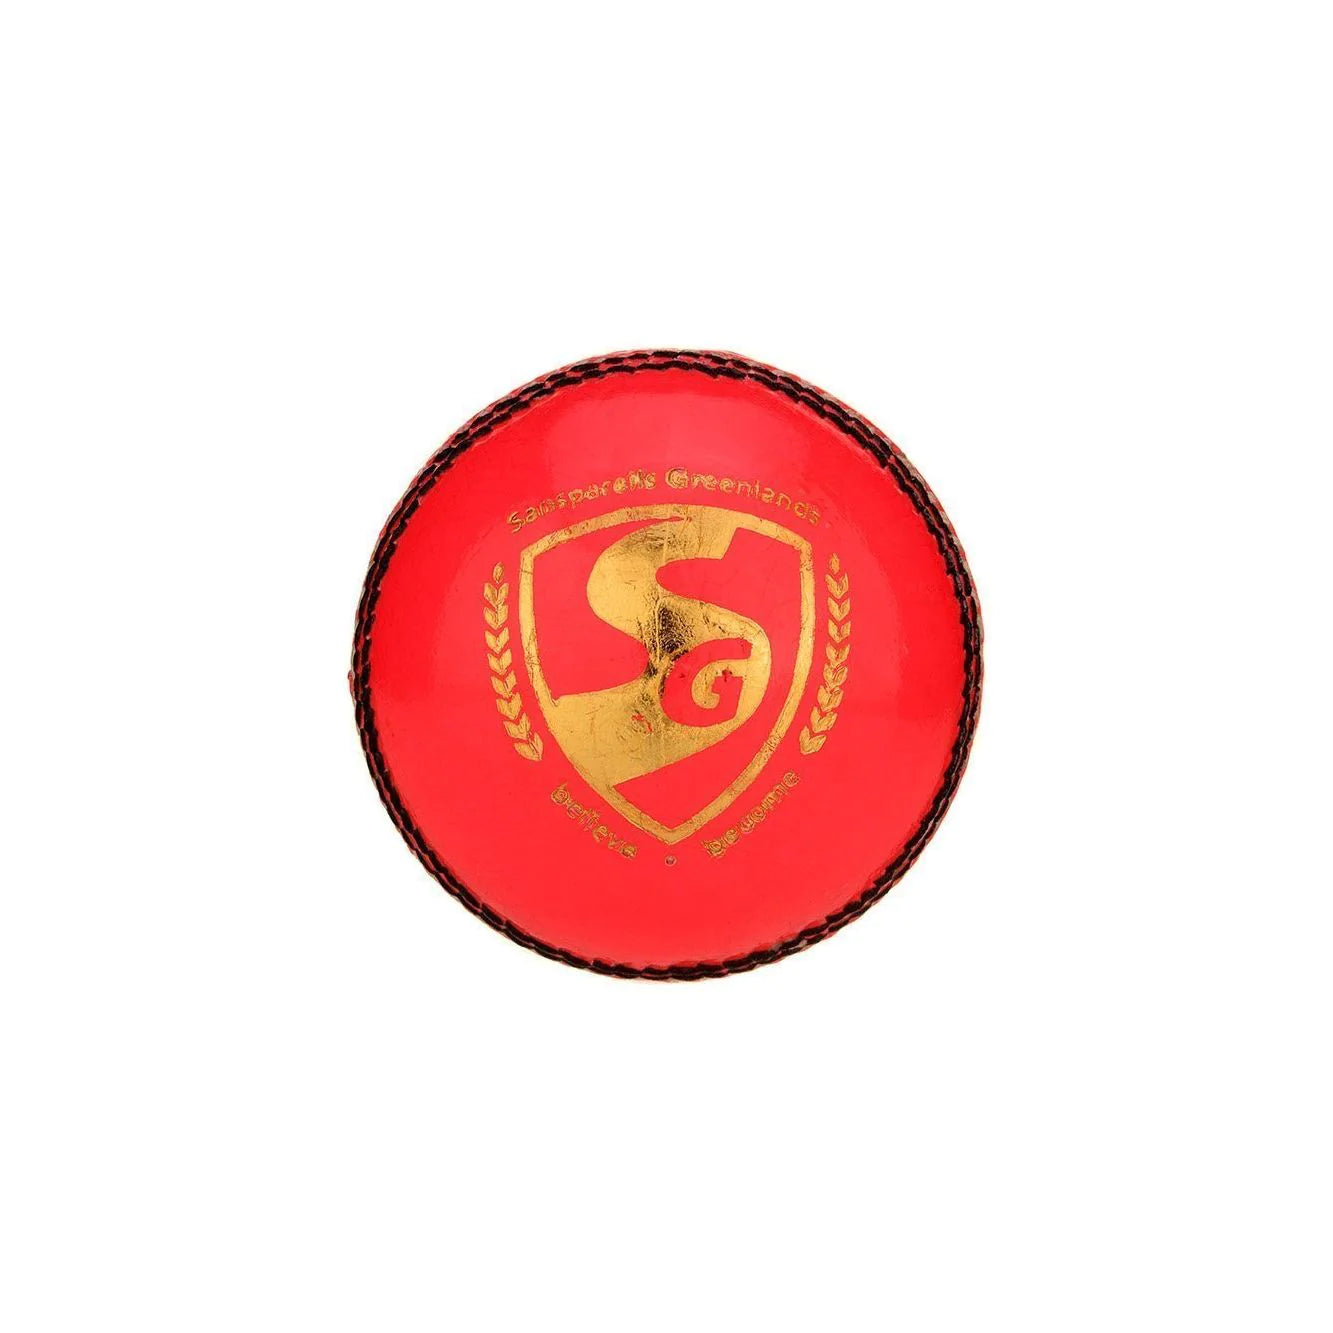 SG Club™ Pink High Quality Four-Piece Water Proof Cricket Leather Ball (SG Pink Ball)